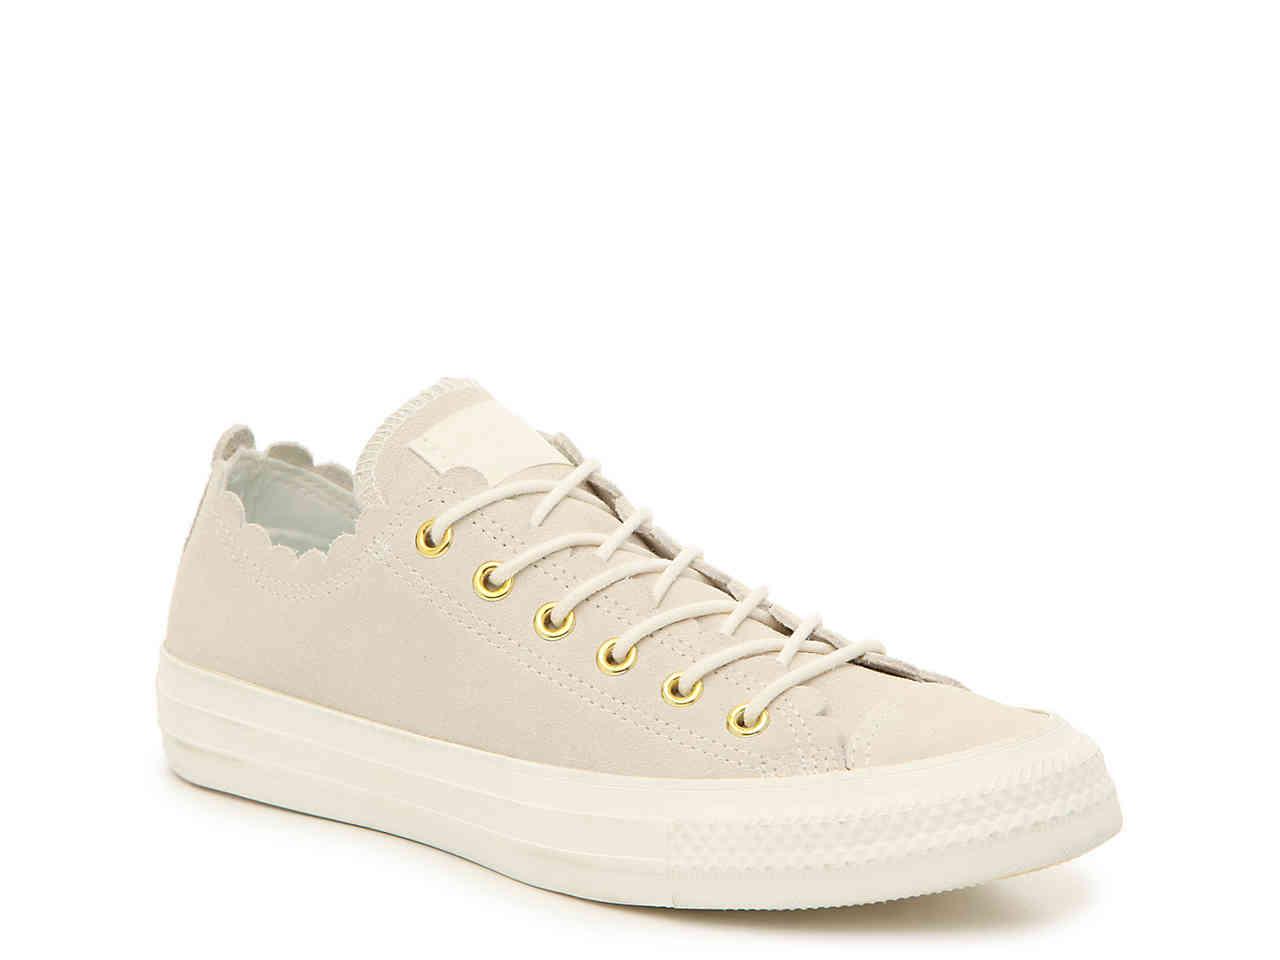 Converse Suede Chuck Taylor All Star Scallop Sneaker in White | Lyst